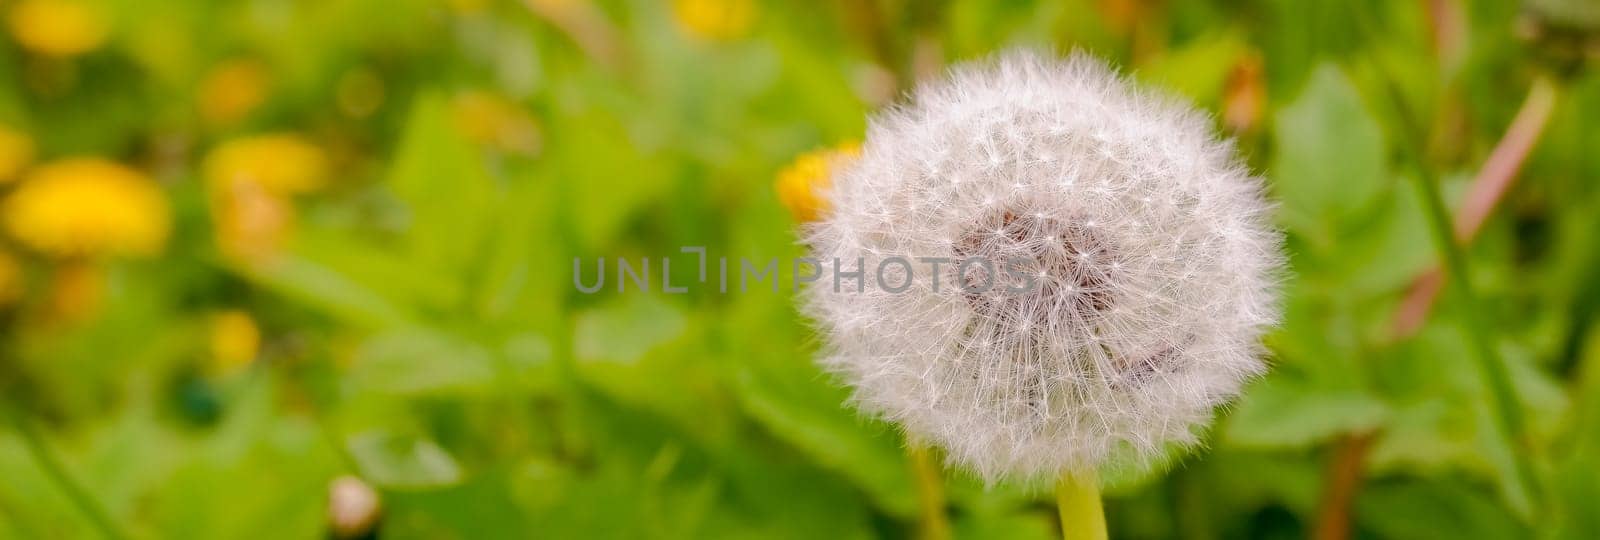 Field of dandelions, panoramic nature background, shallow depth of field.Banner with white Dandelion flower with seeds on blurred green background. Day in park. Beauty in simple things. Copy space. by YuliaYaspe1979